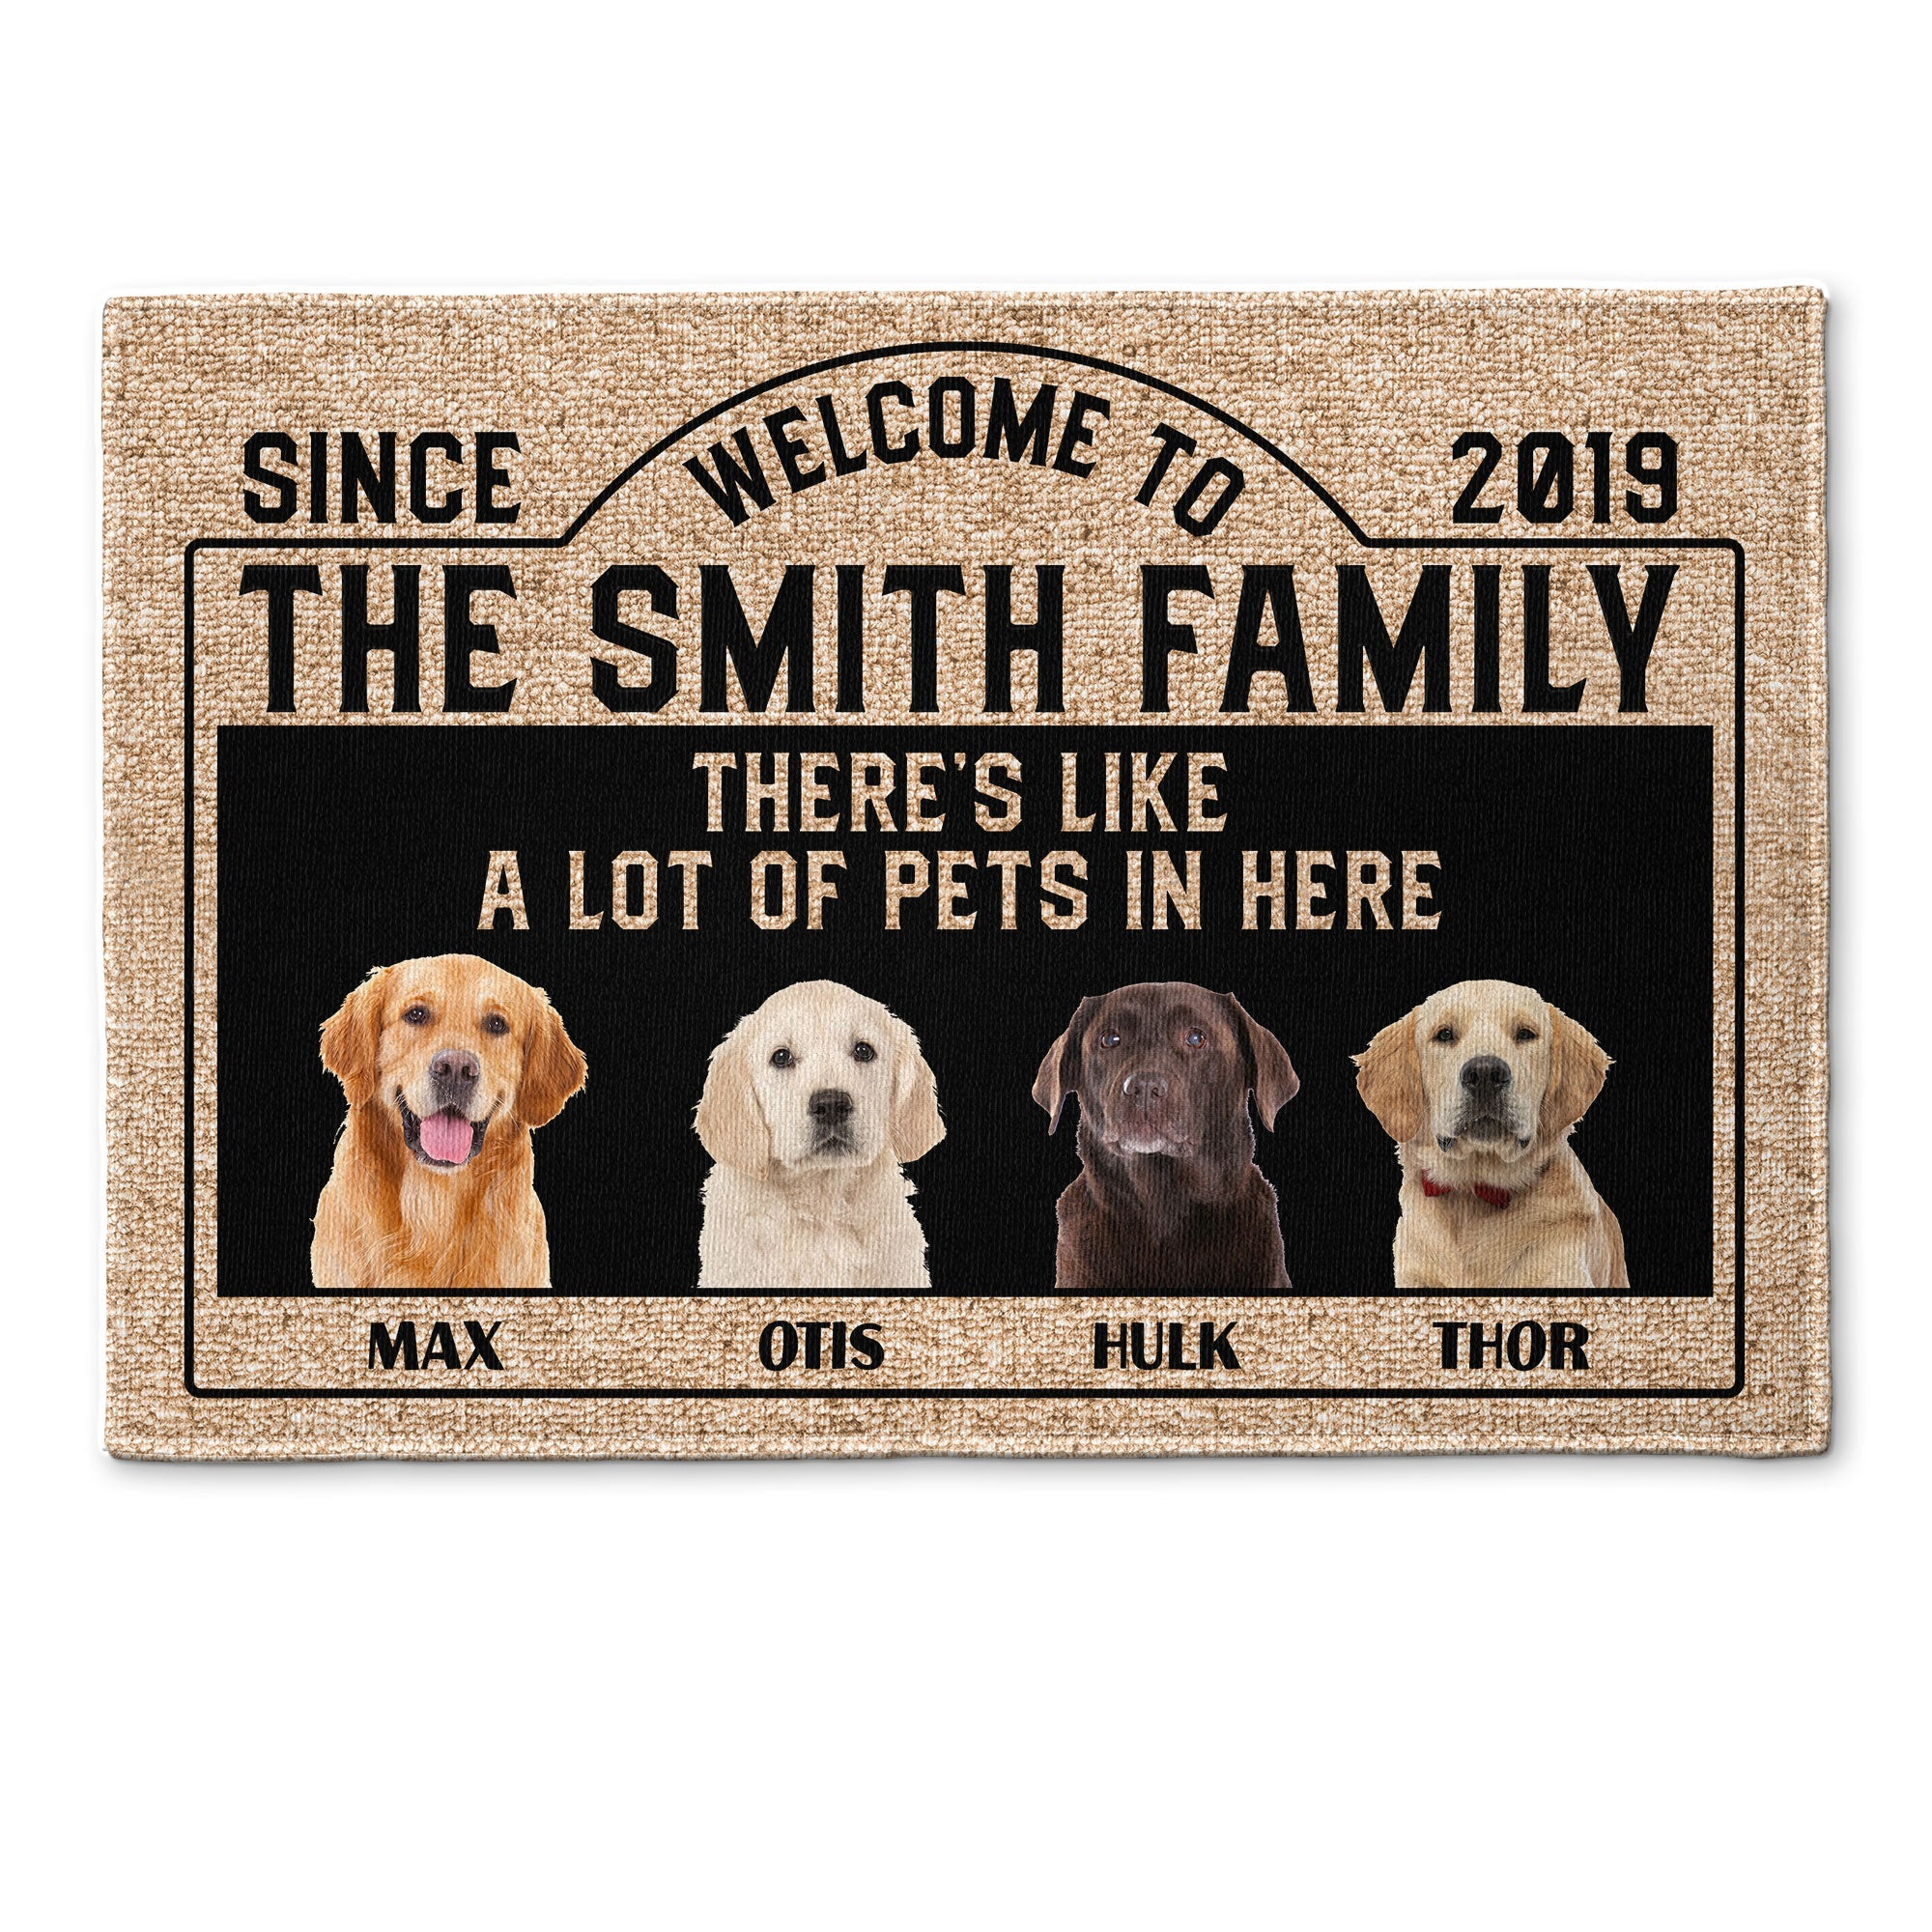 There's Like A Lot Of Pets In Here Ver 2 - Personalized Doormat - Birthday, Funny, Home Decor Gift For Cat & Dog Lover, Pet Owner, Cat Mom, Dog Mom